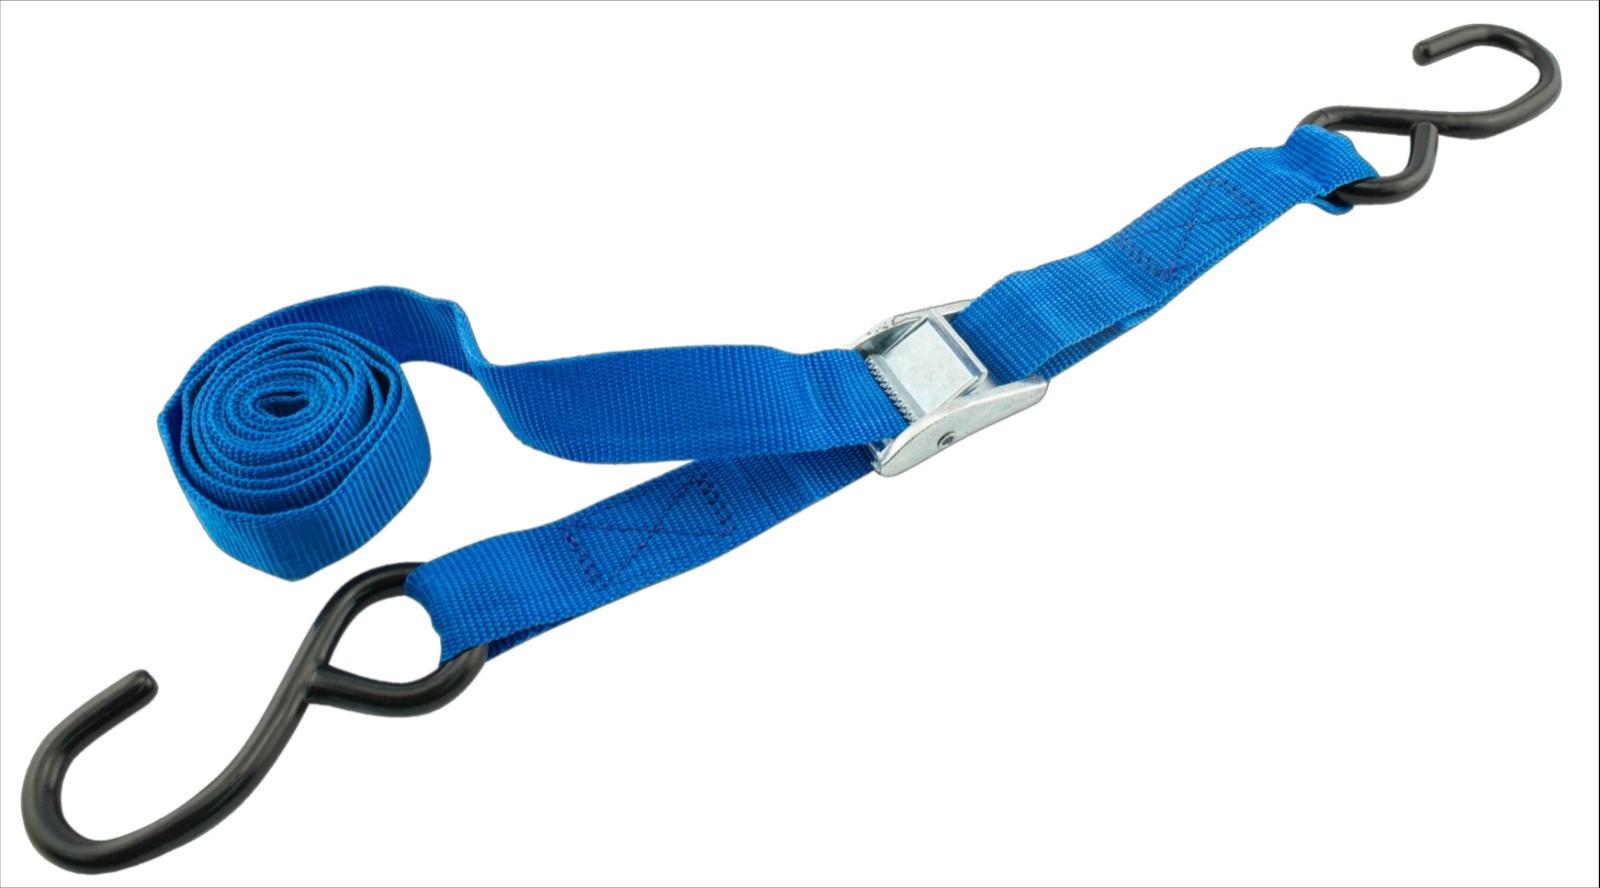 1" x 10' Light Duty Cam Strap 300 lb rated